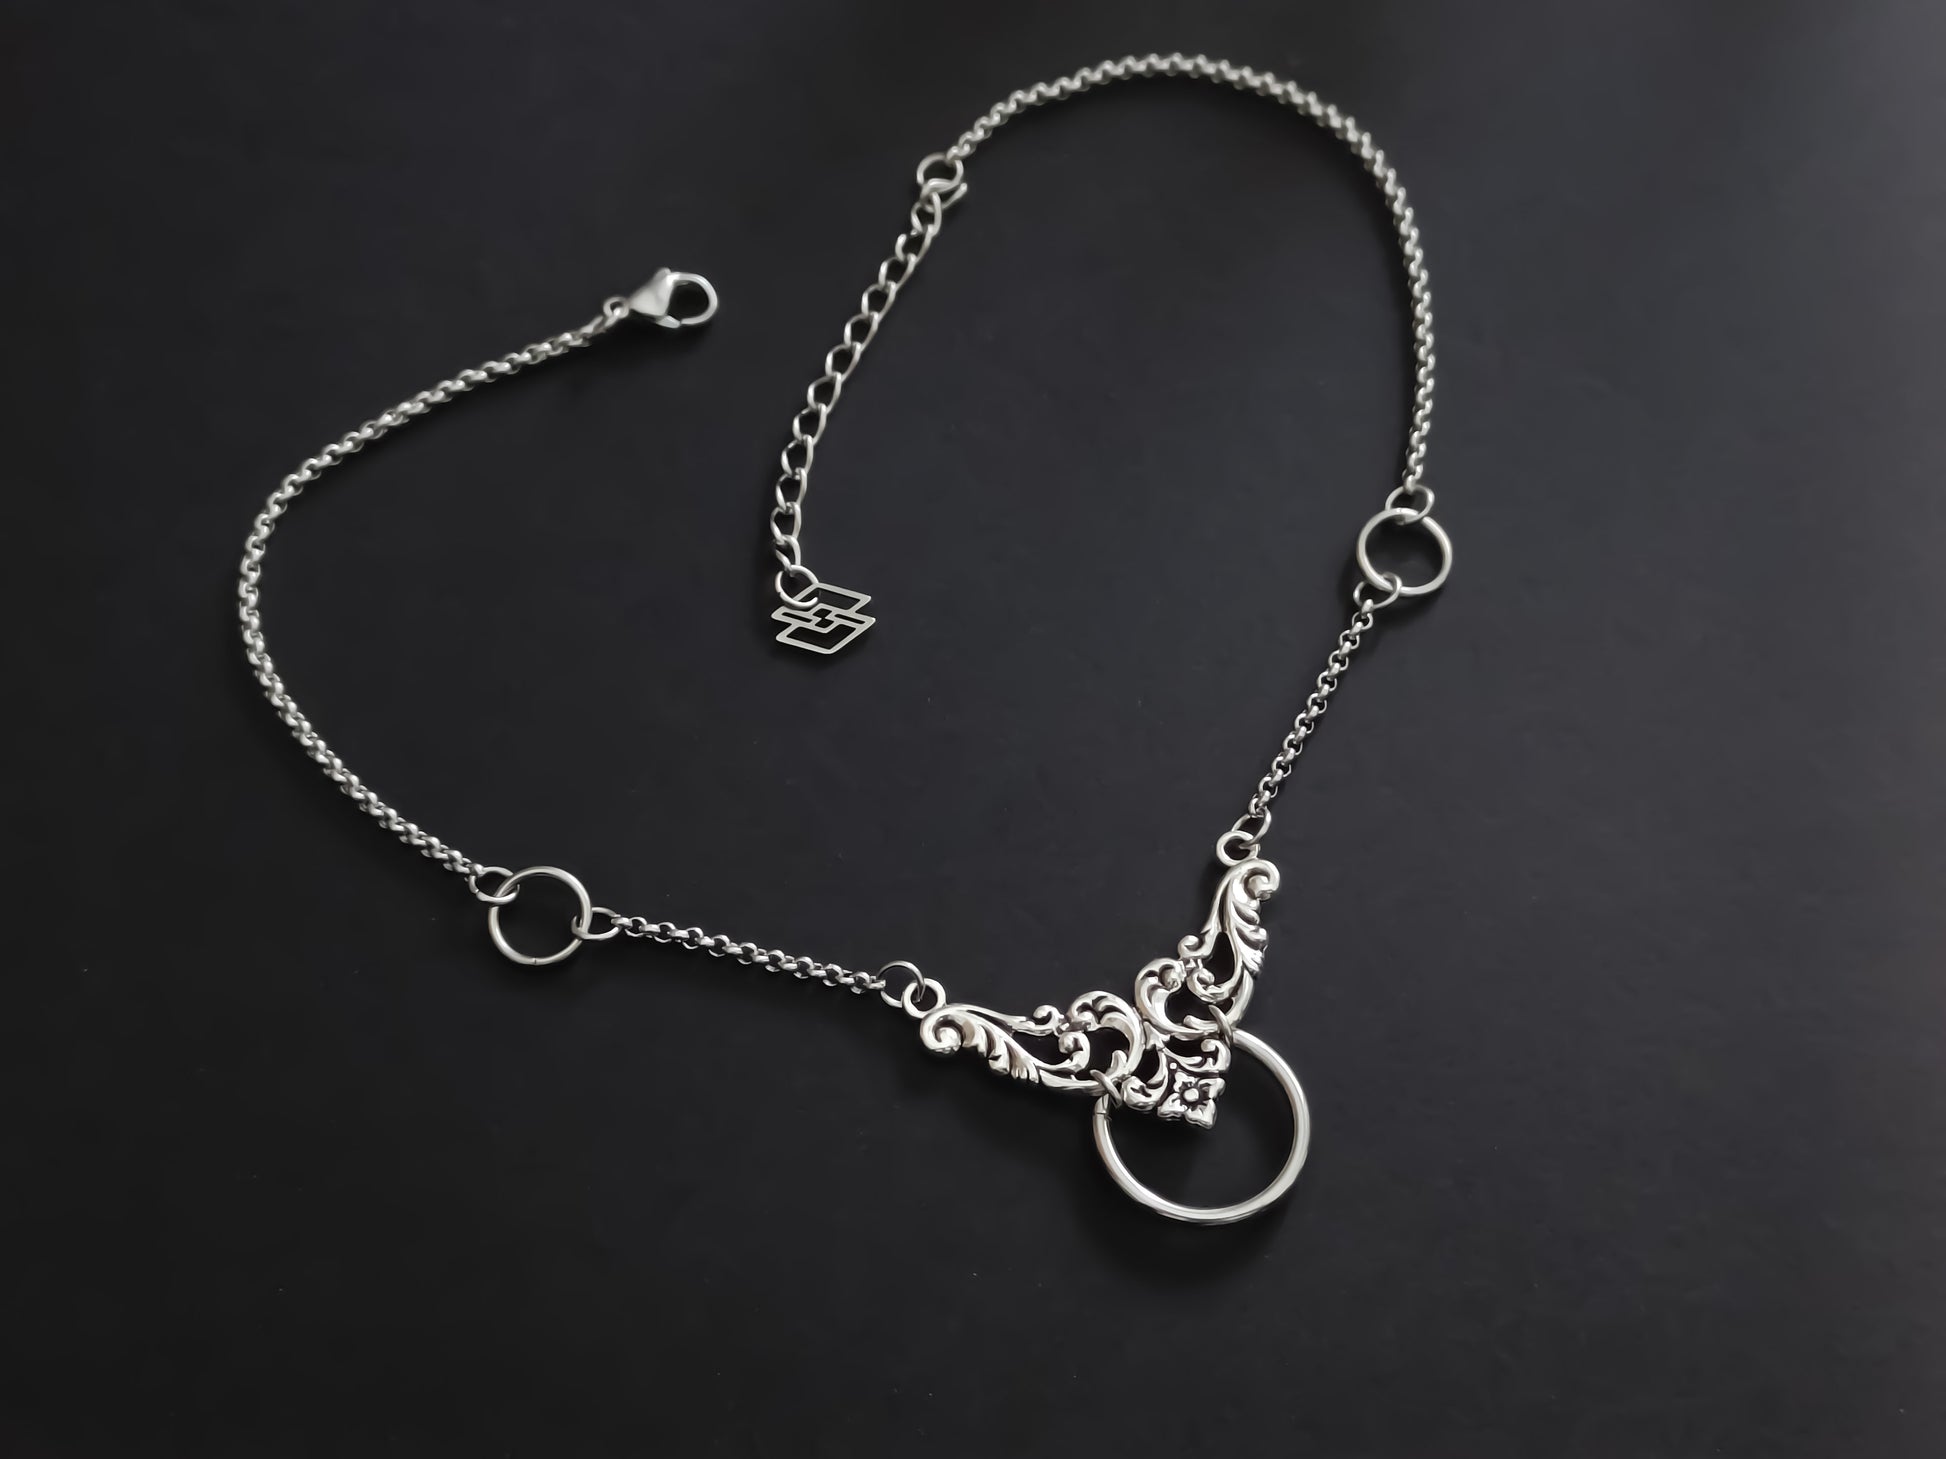 This image displays a Myril Jewels elegant chain choker, featuring a floral motif and central O-ring, embodying the sophisticated, dark-avantgarde aesthetic of neo-goth style.